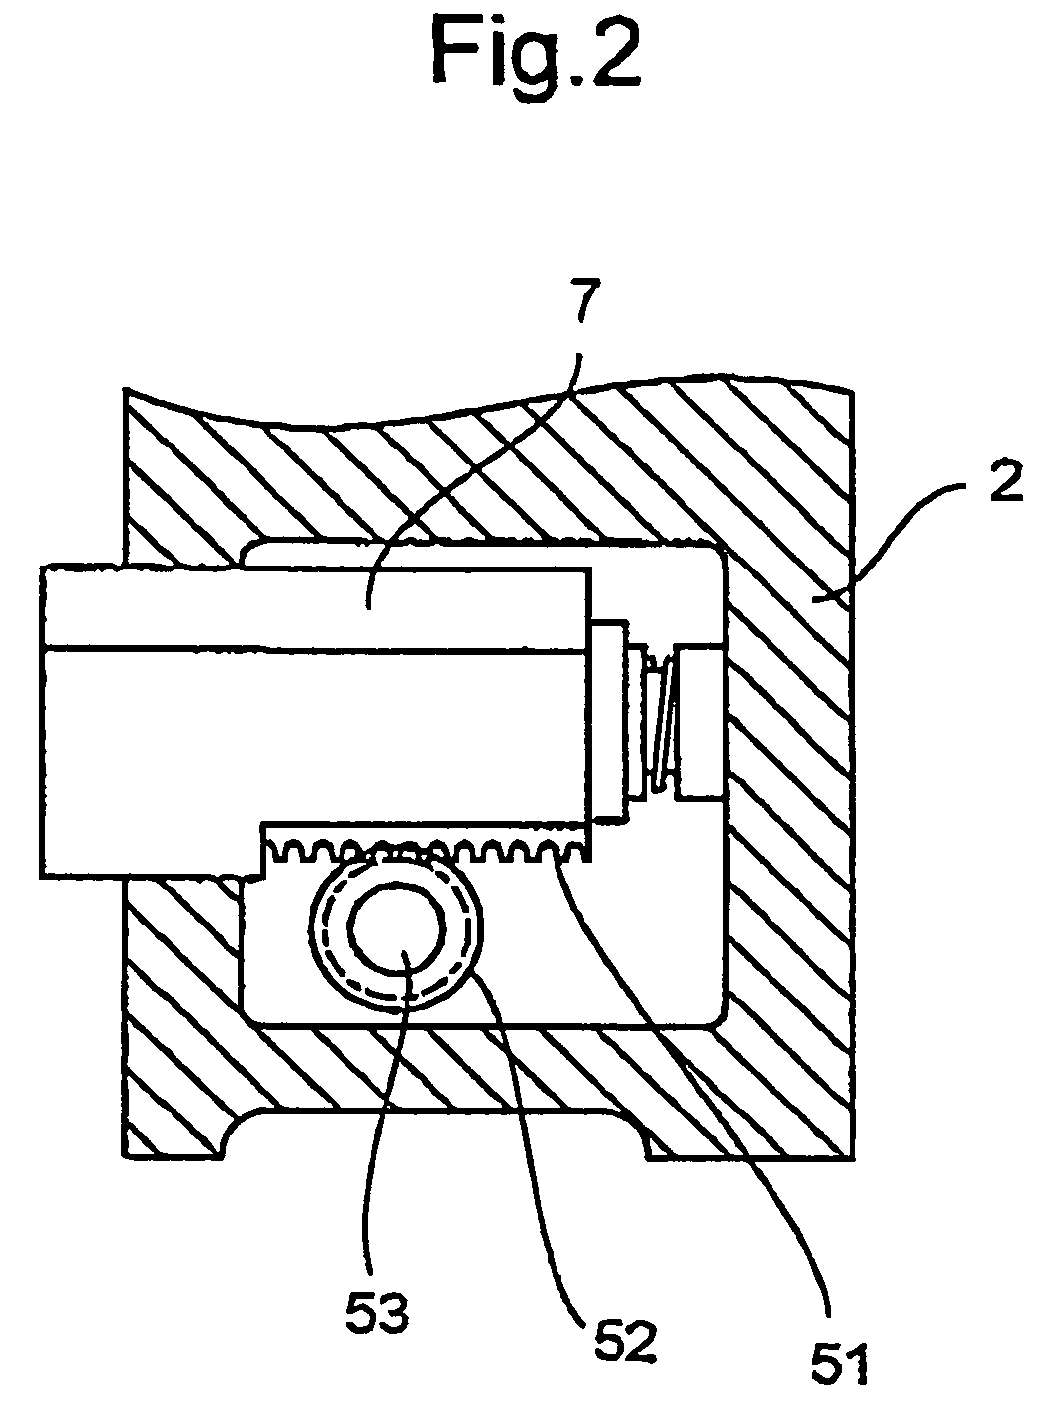 Screw compressor capable of manually adjusting both internal volume ratio and capacity and combined screw compressor unit accommodating variation in suction or discharge pressure